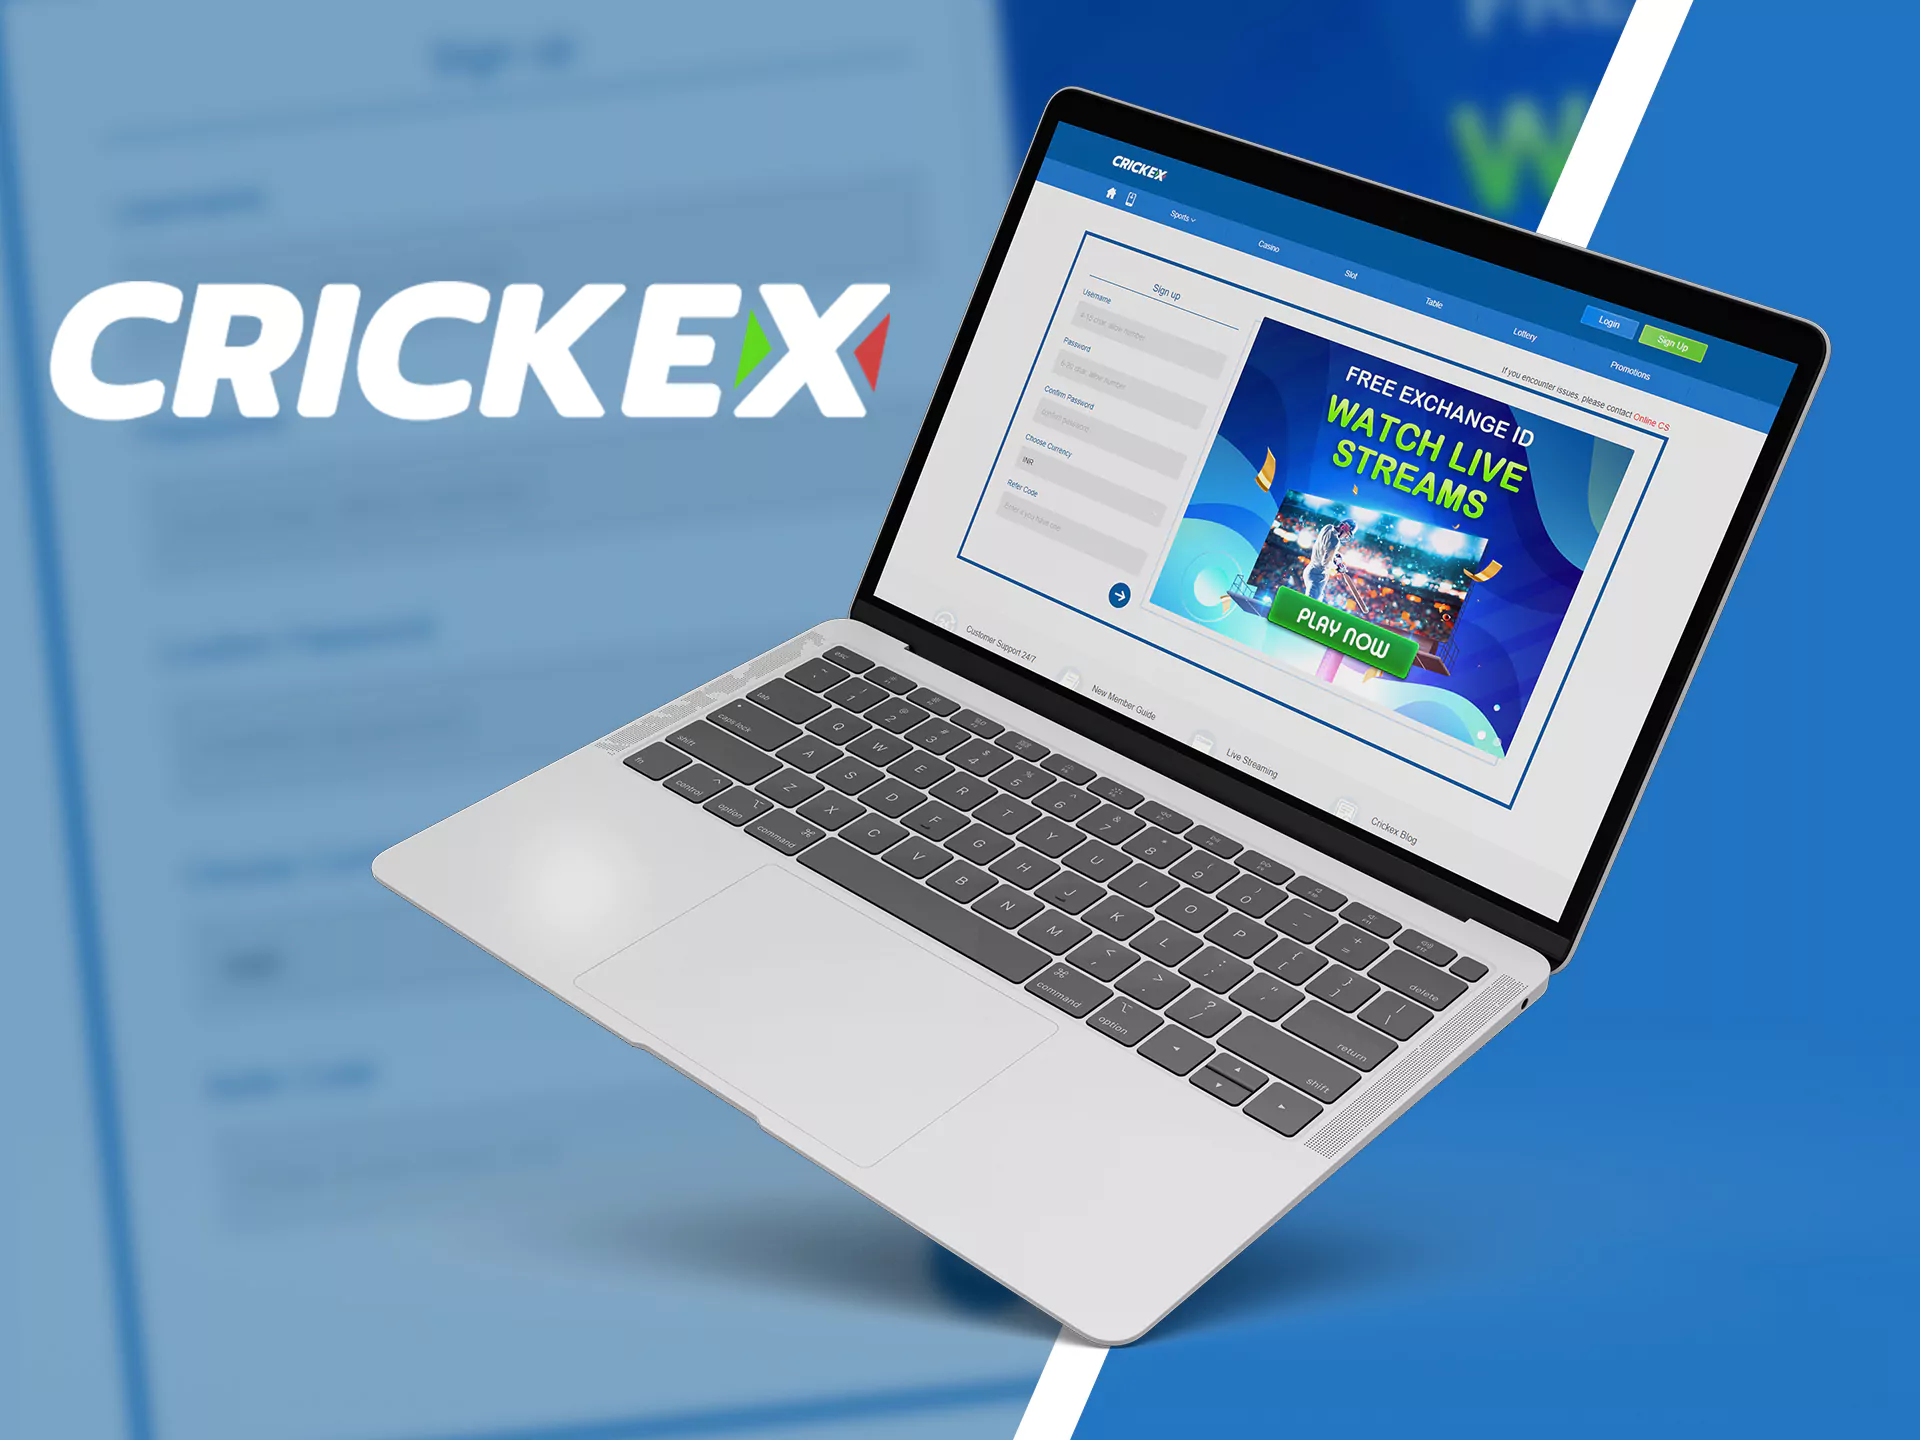 Register an account at Crickex in 3 easy steps.